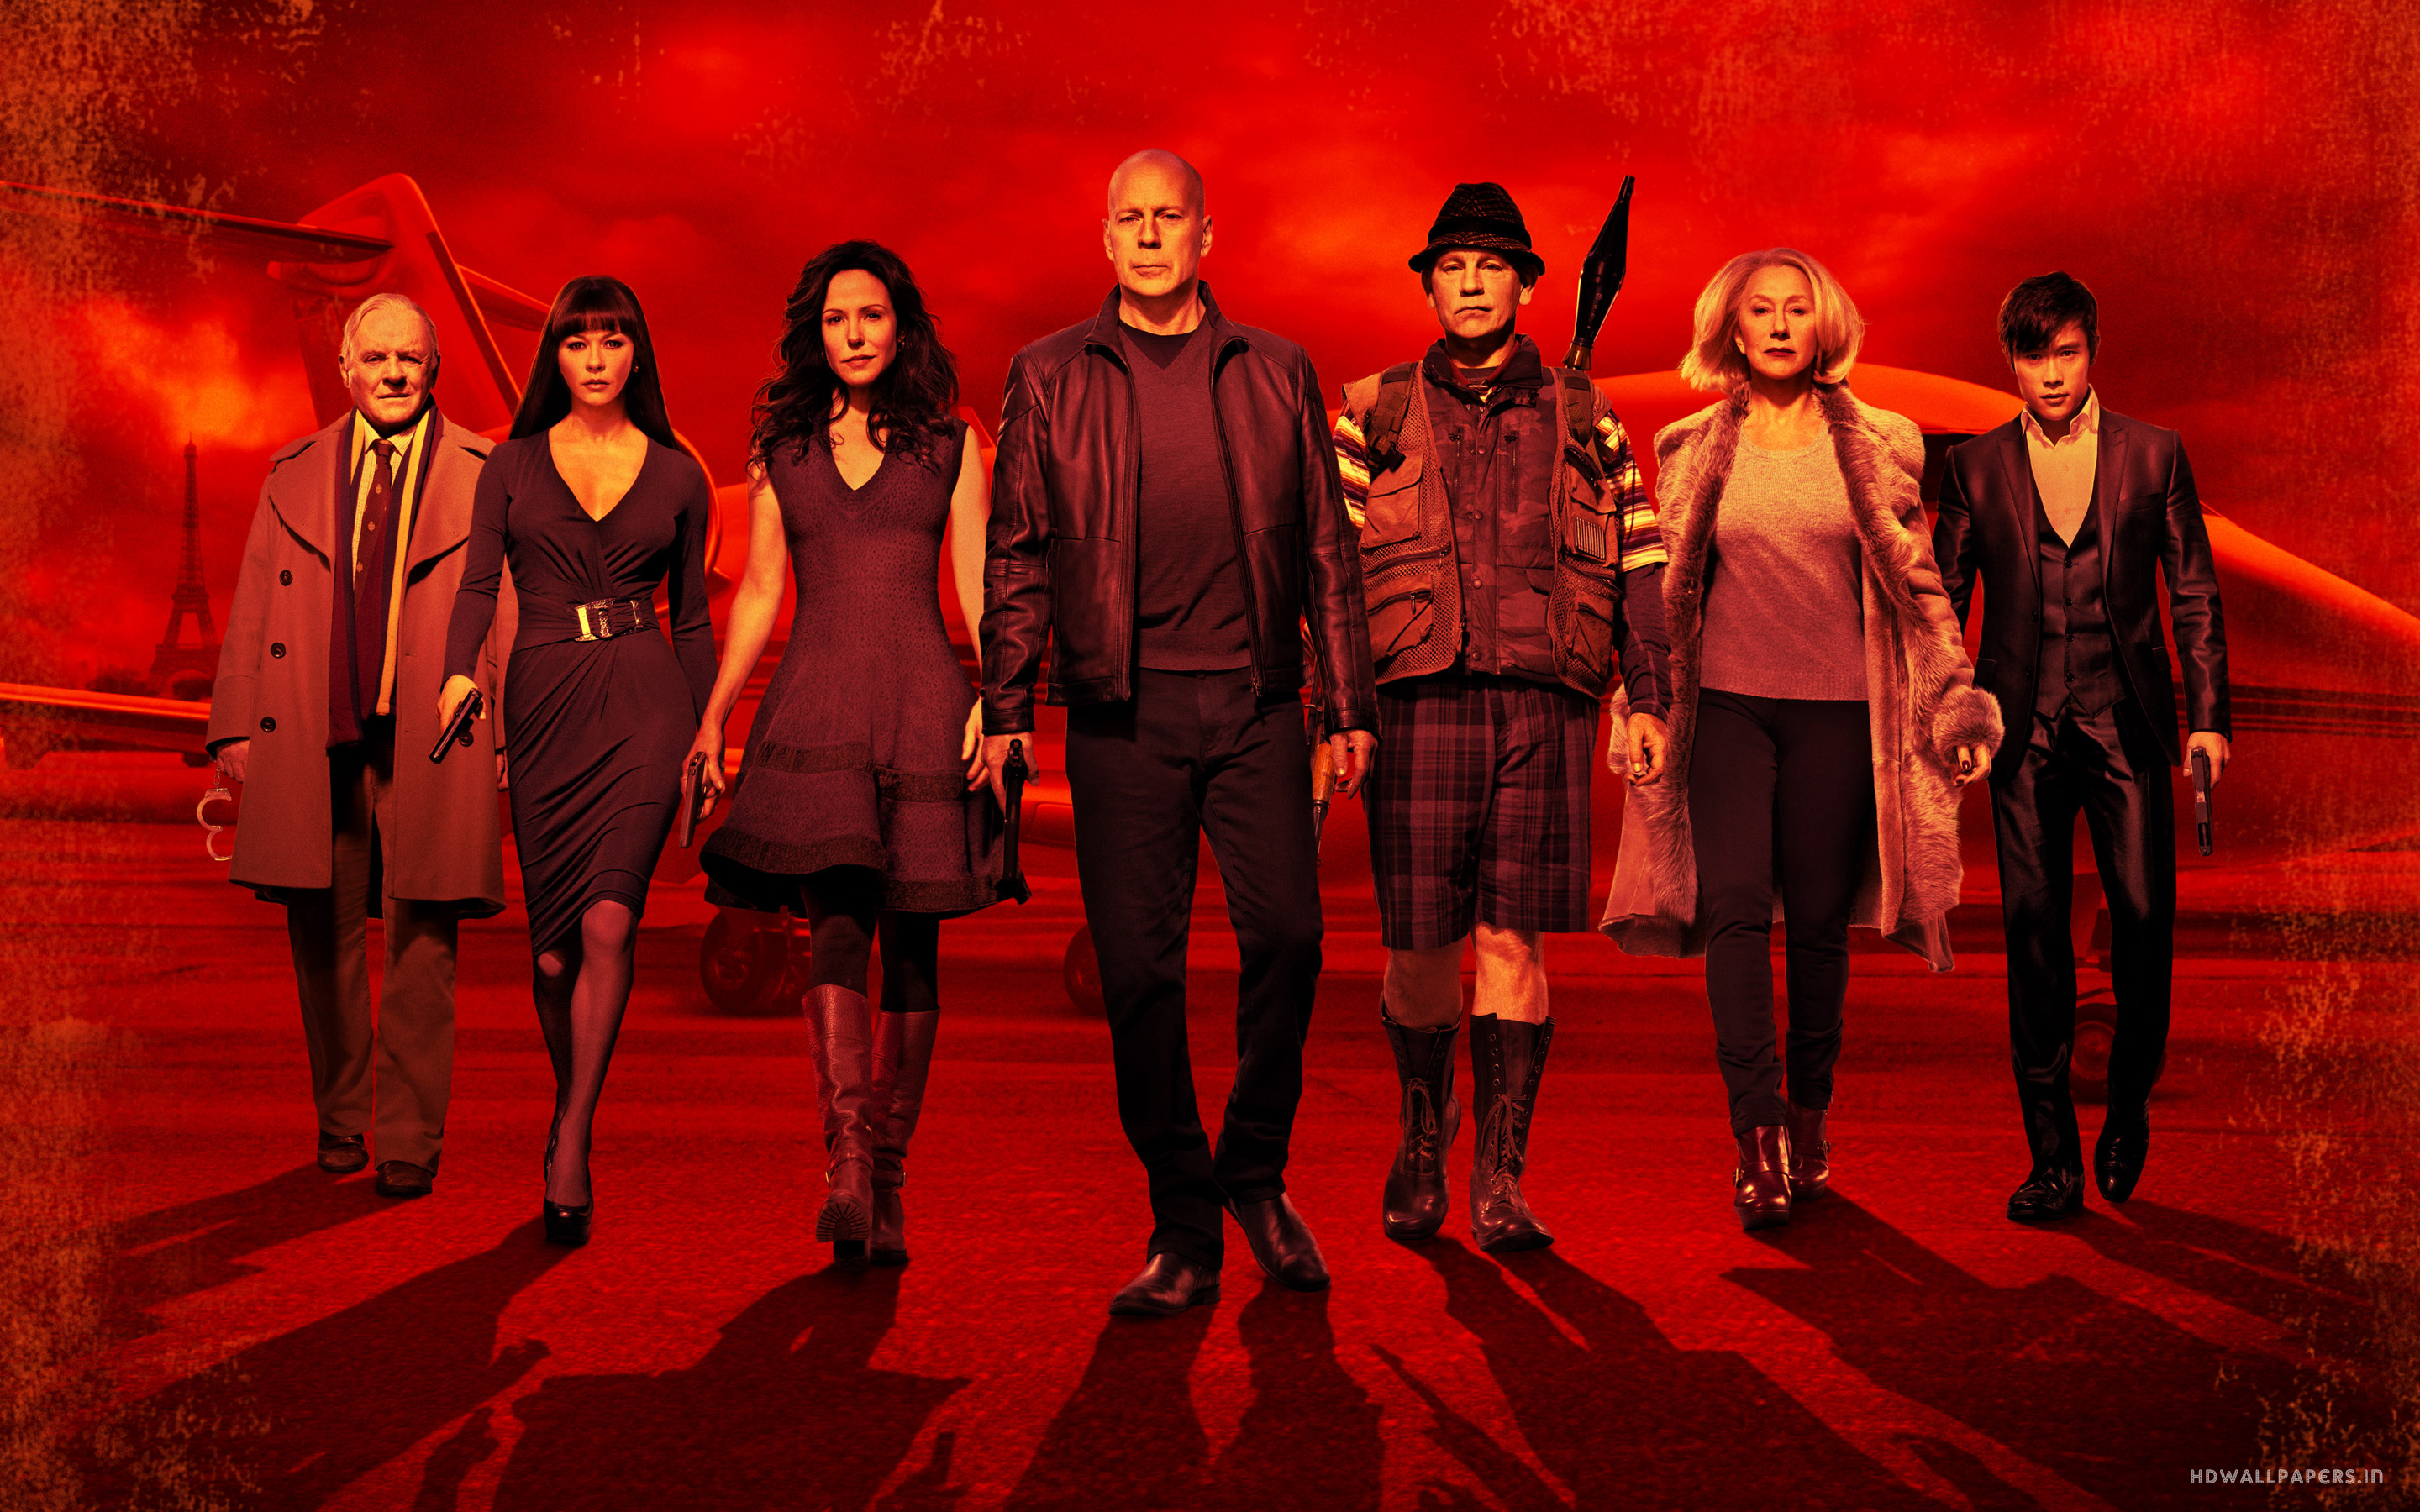 RED 2: Amiable and Breezy (for whatever that’s worth)